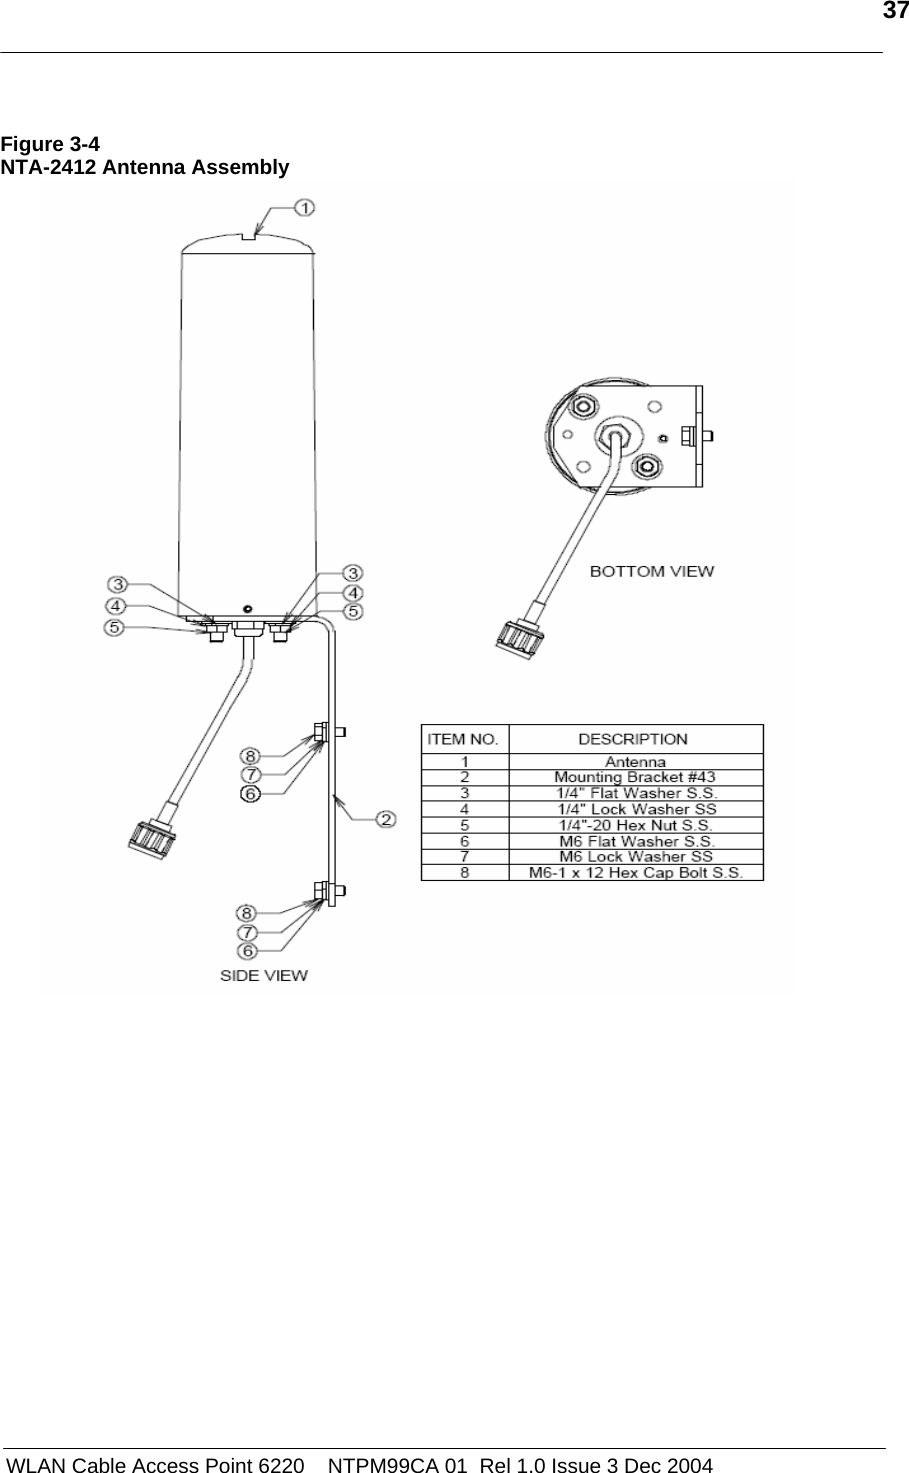   37   WLAN Cable Access Point 6220    NTPM99CA 01  Rel 1.0 Issue 3 Dec 2004  Figure 3-4 NTA-2412 Antenna Assembly  